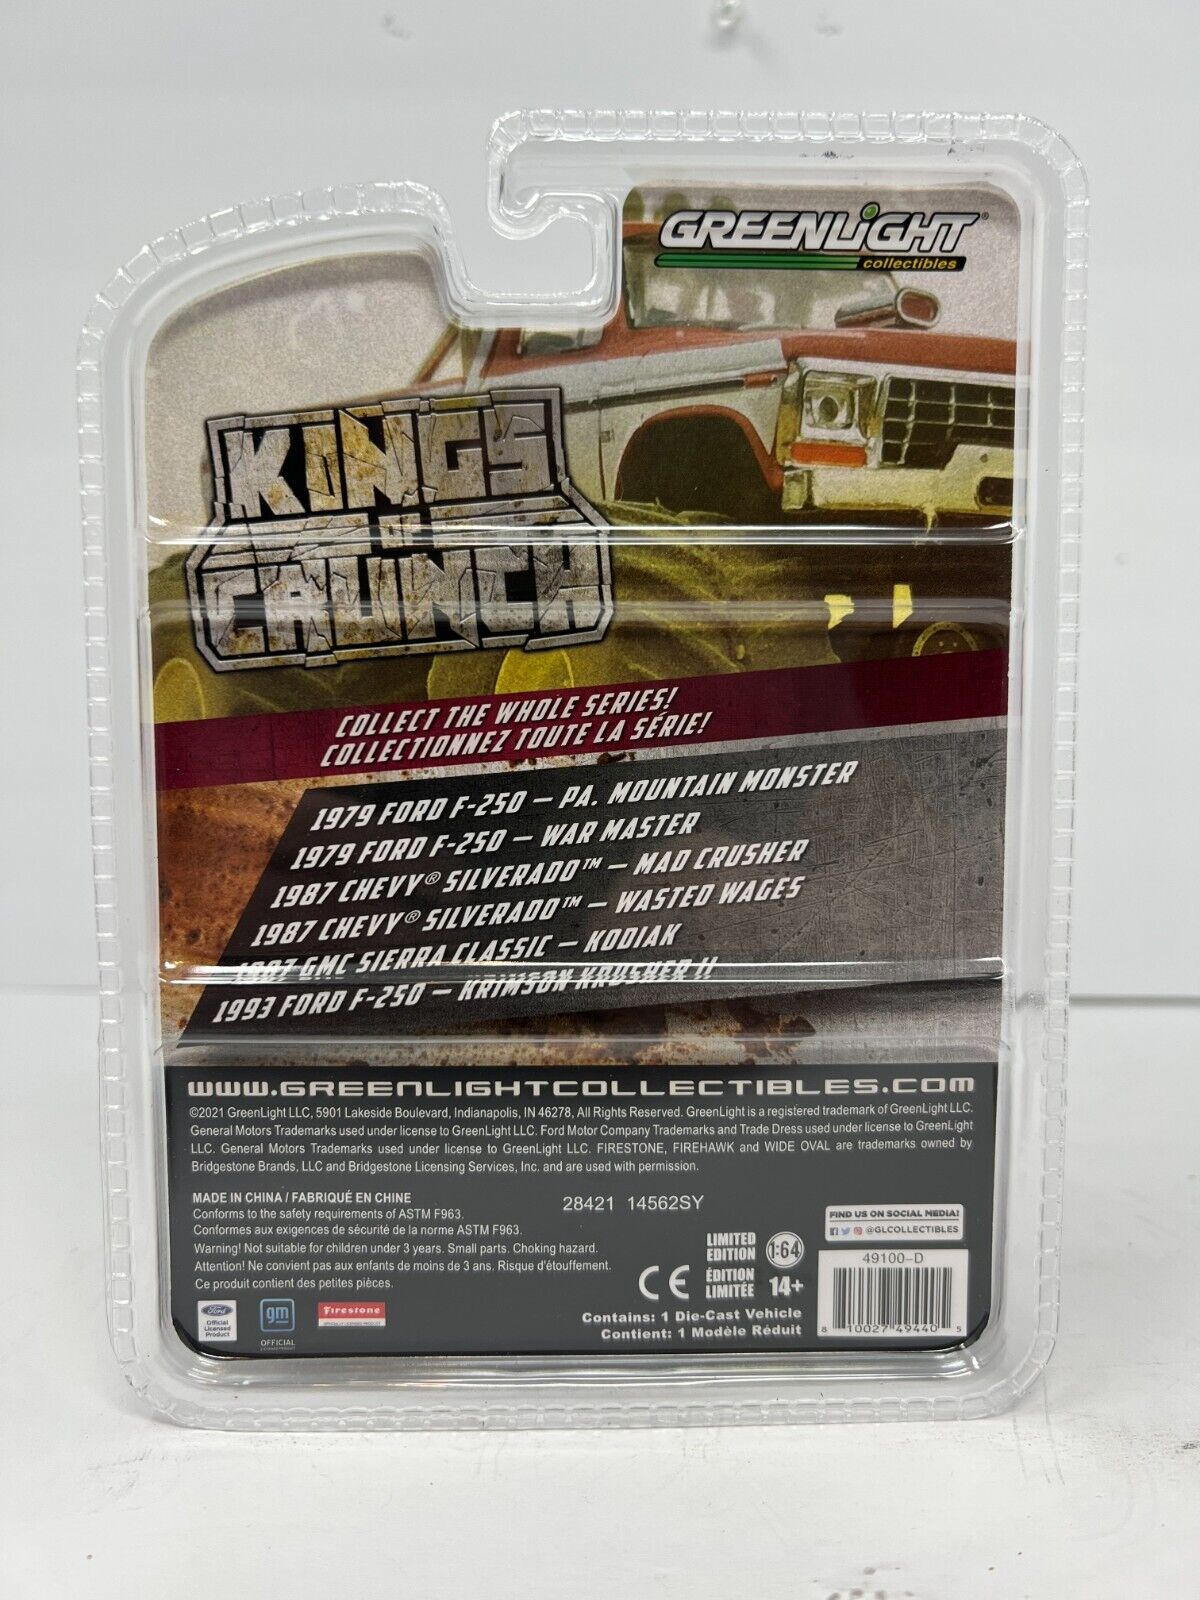 Greenlight Kings of Crunch Series 10 Chevy Silverado Wasted Wages 1:64 Diecast